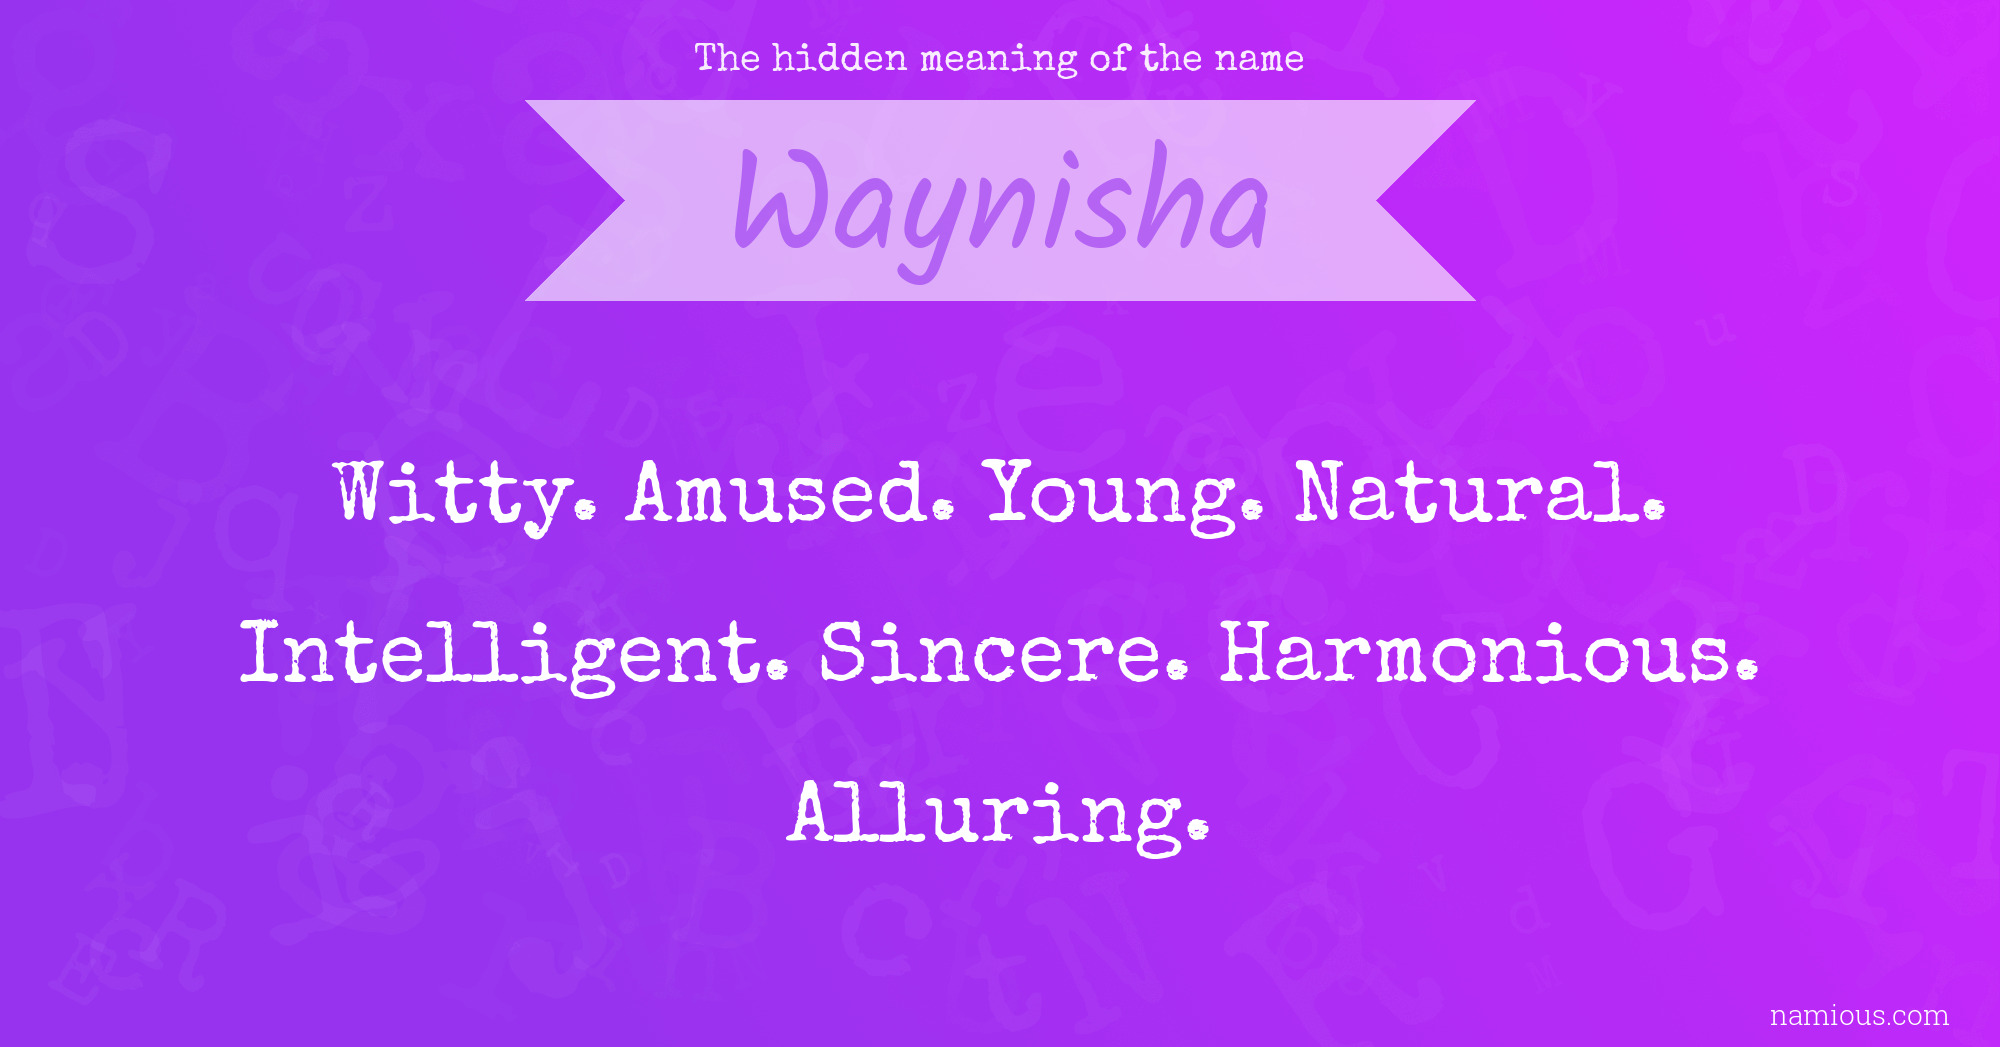 The hidden meaning of the name Waynisha